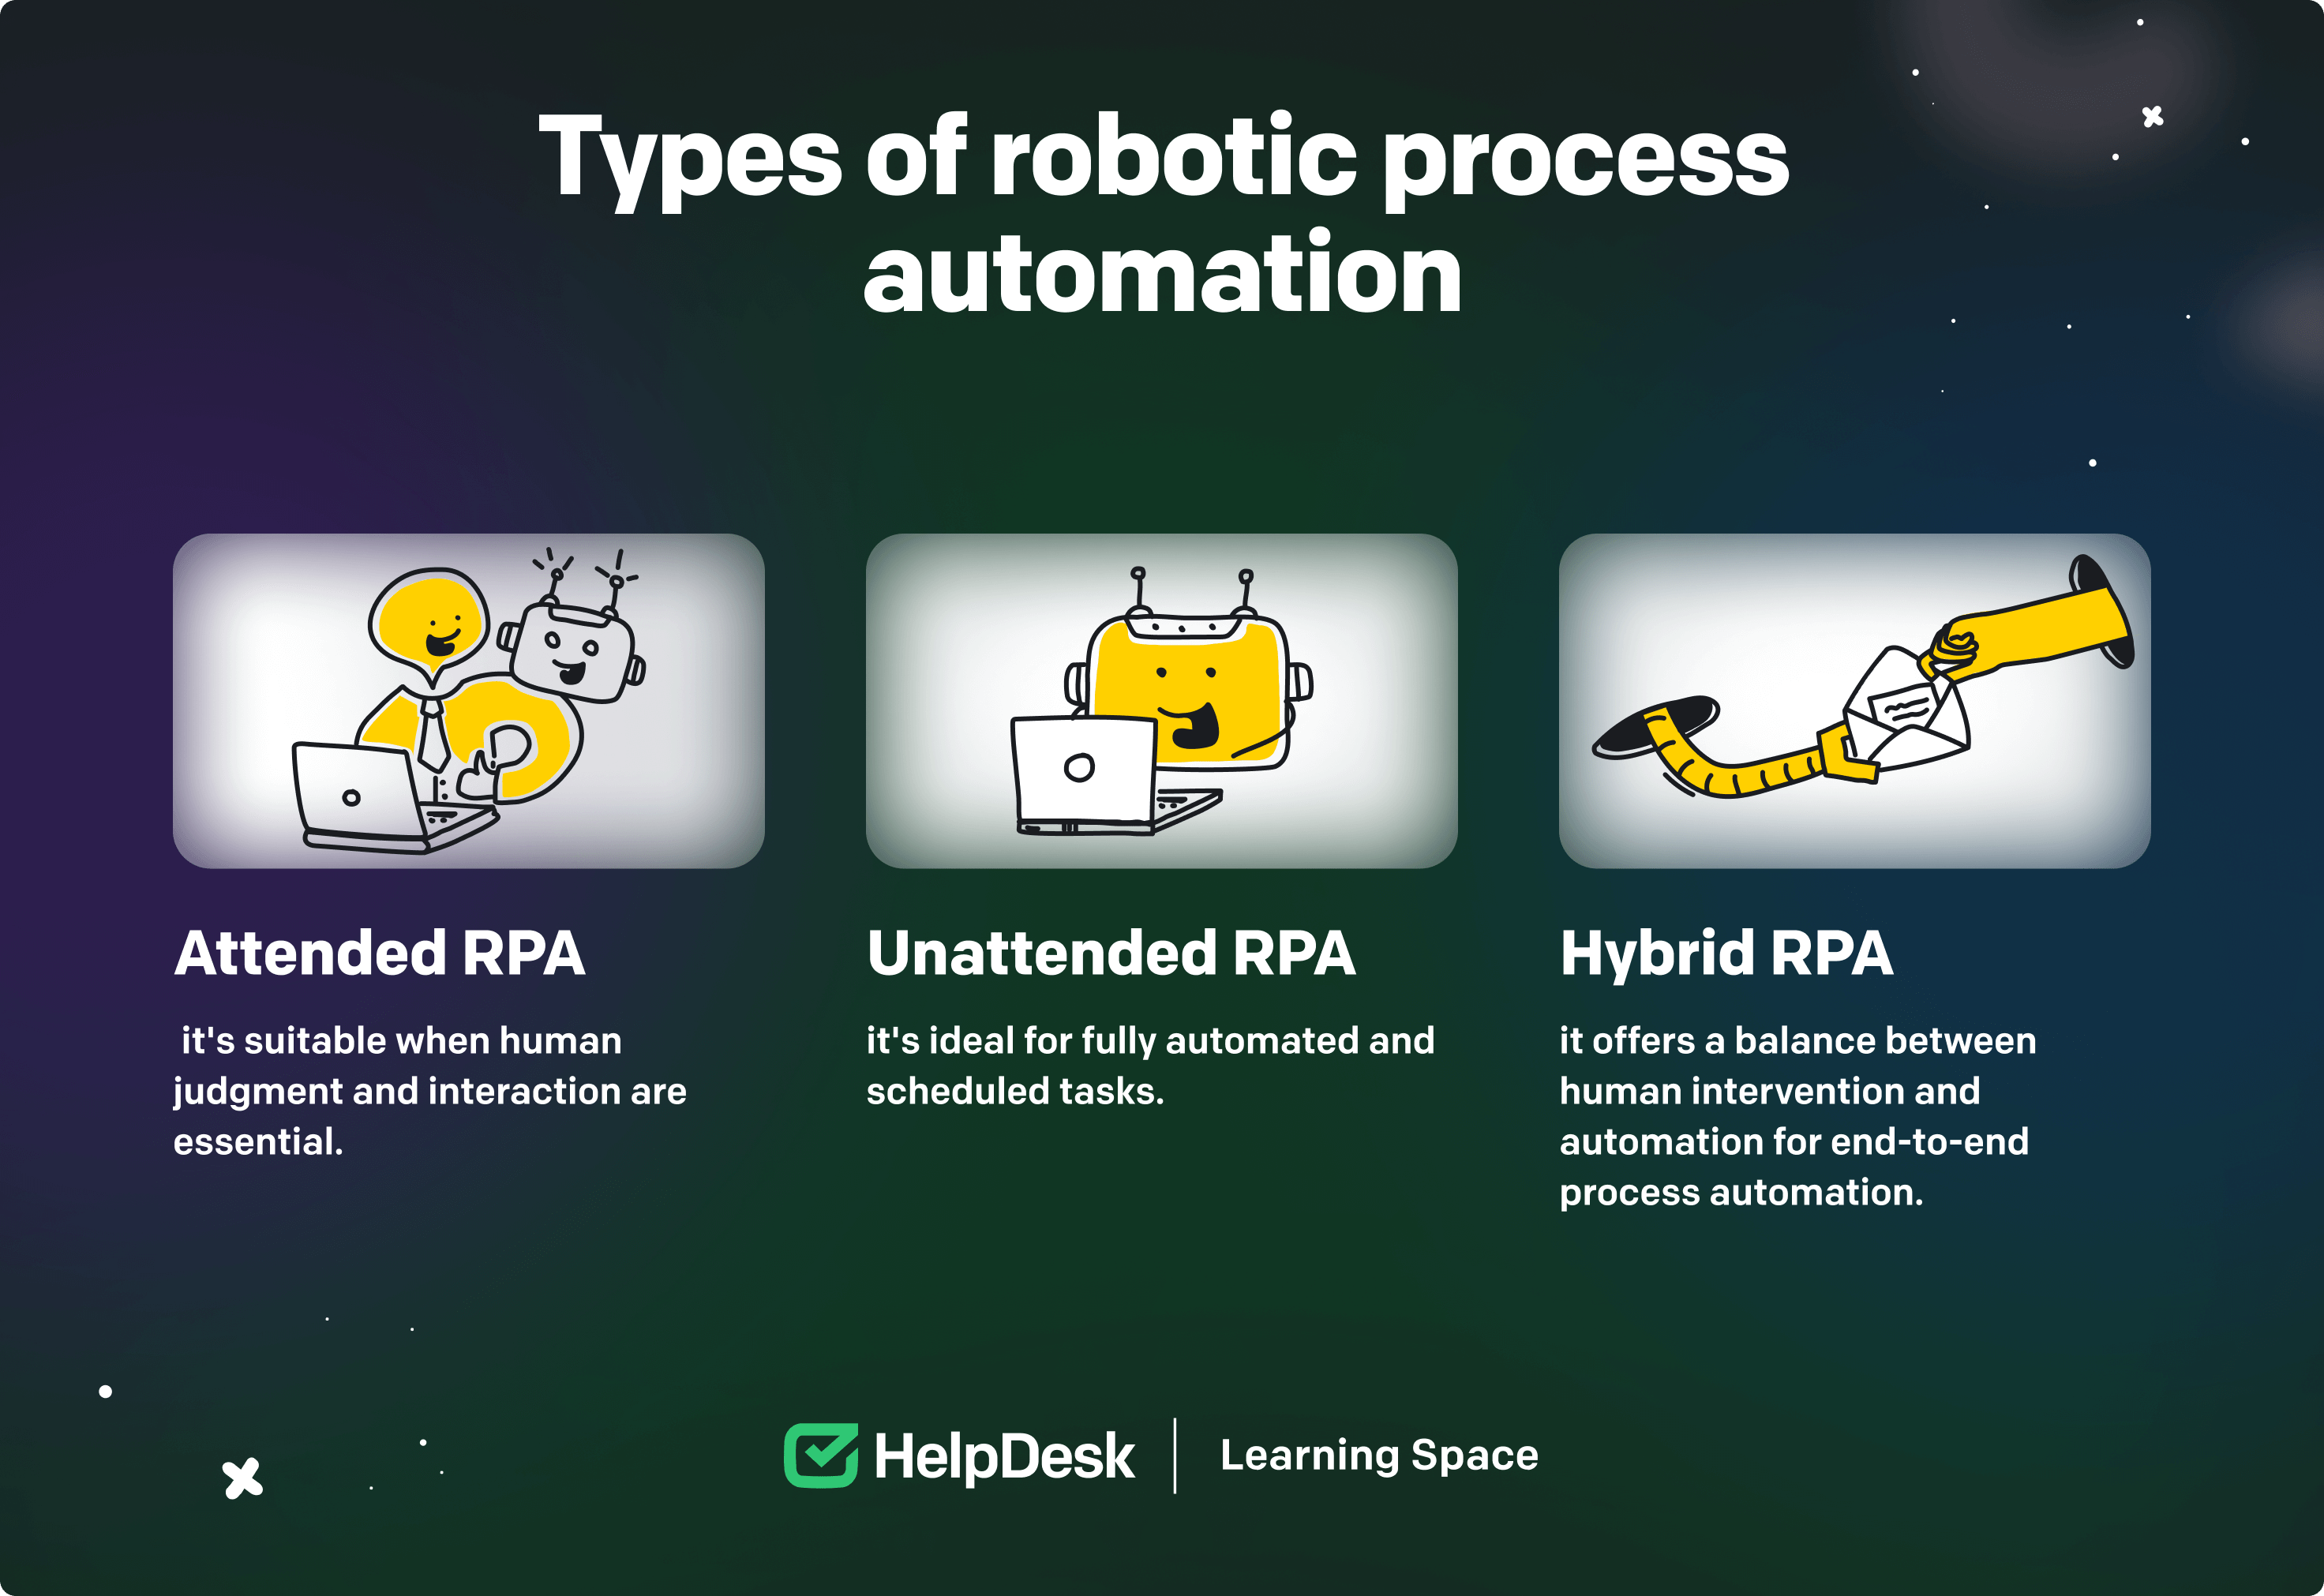 Types of robotic process automation